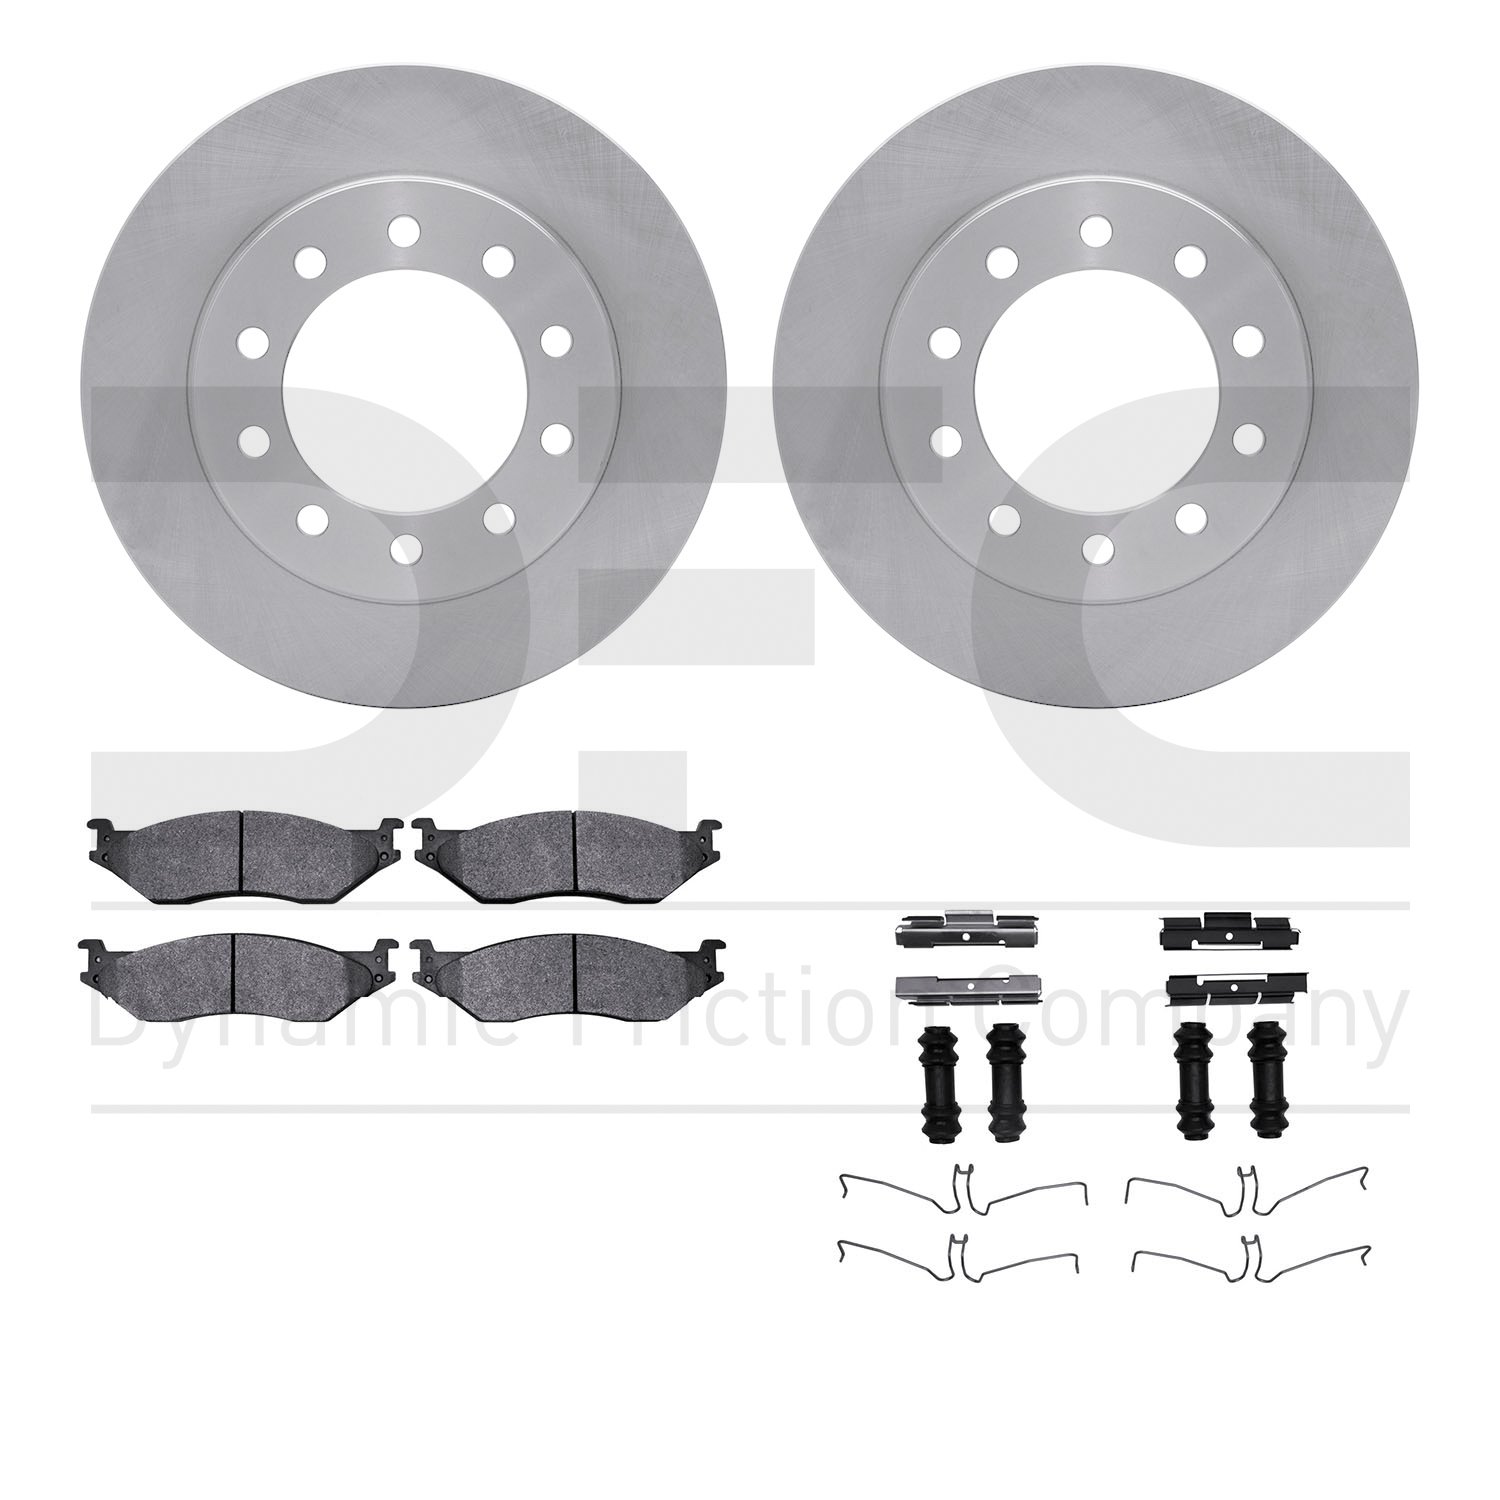 6412-54236 Brake Rotors with Ultimate-Duty Brake Pads Kit & Hardware, 2005-2016 Ford/Lincoln/Mercury/Mazda, Position: Front